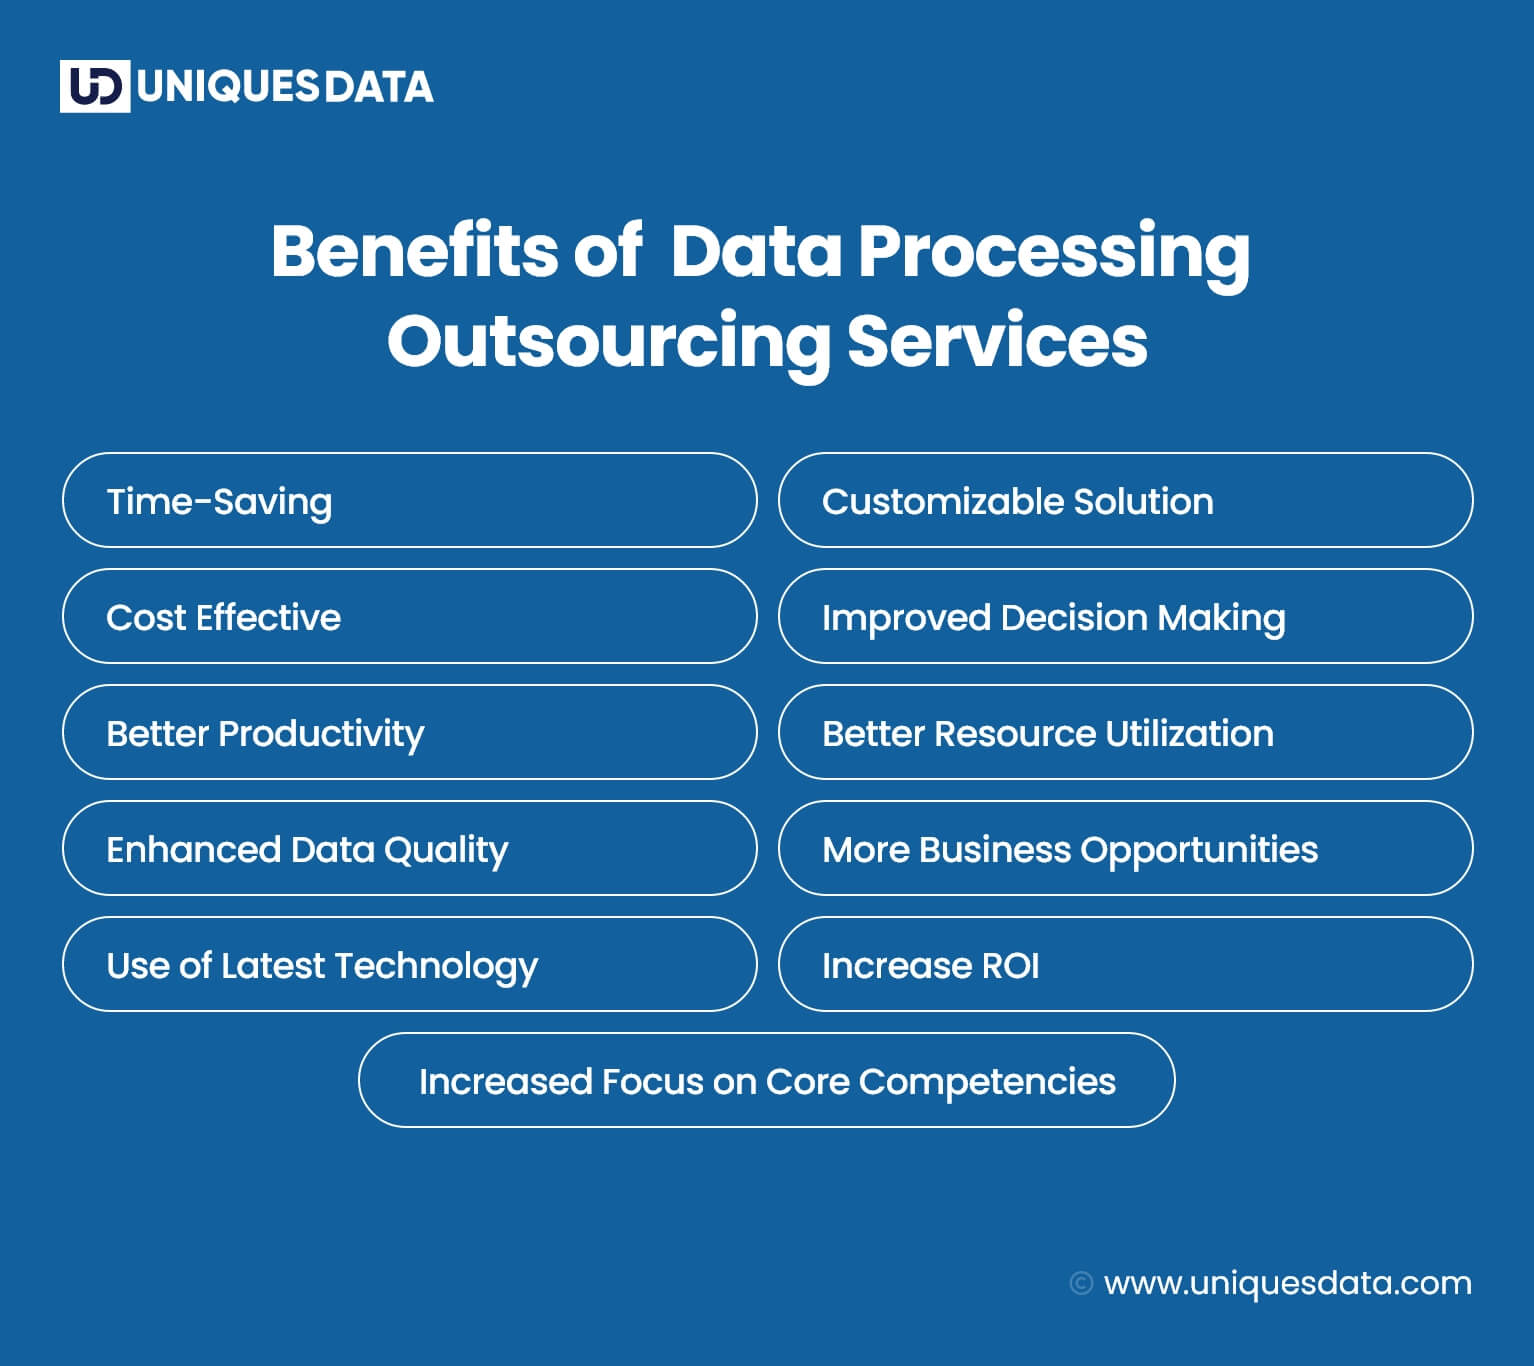 Benefits of Data Processing Outsourcing Services